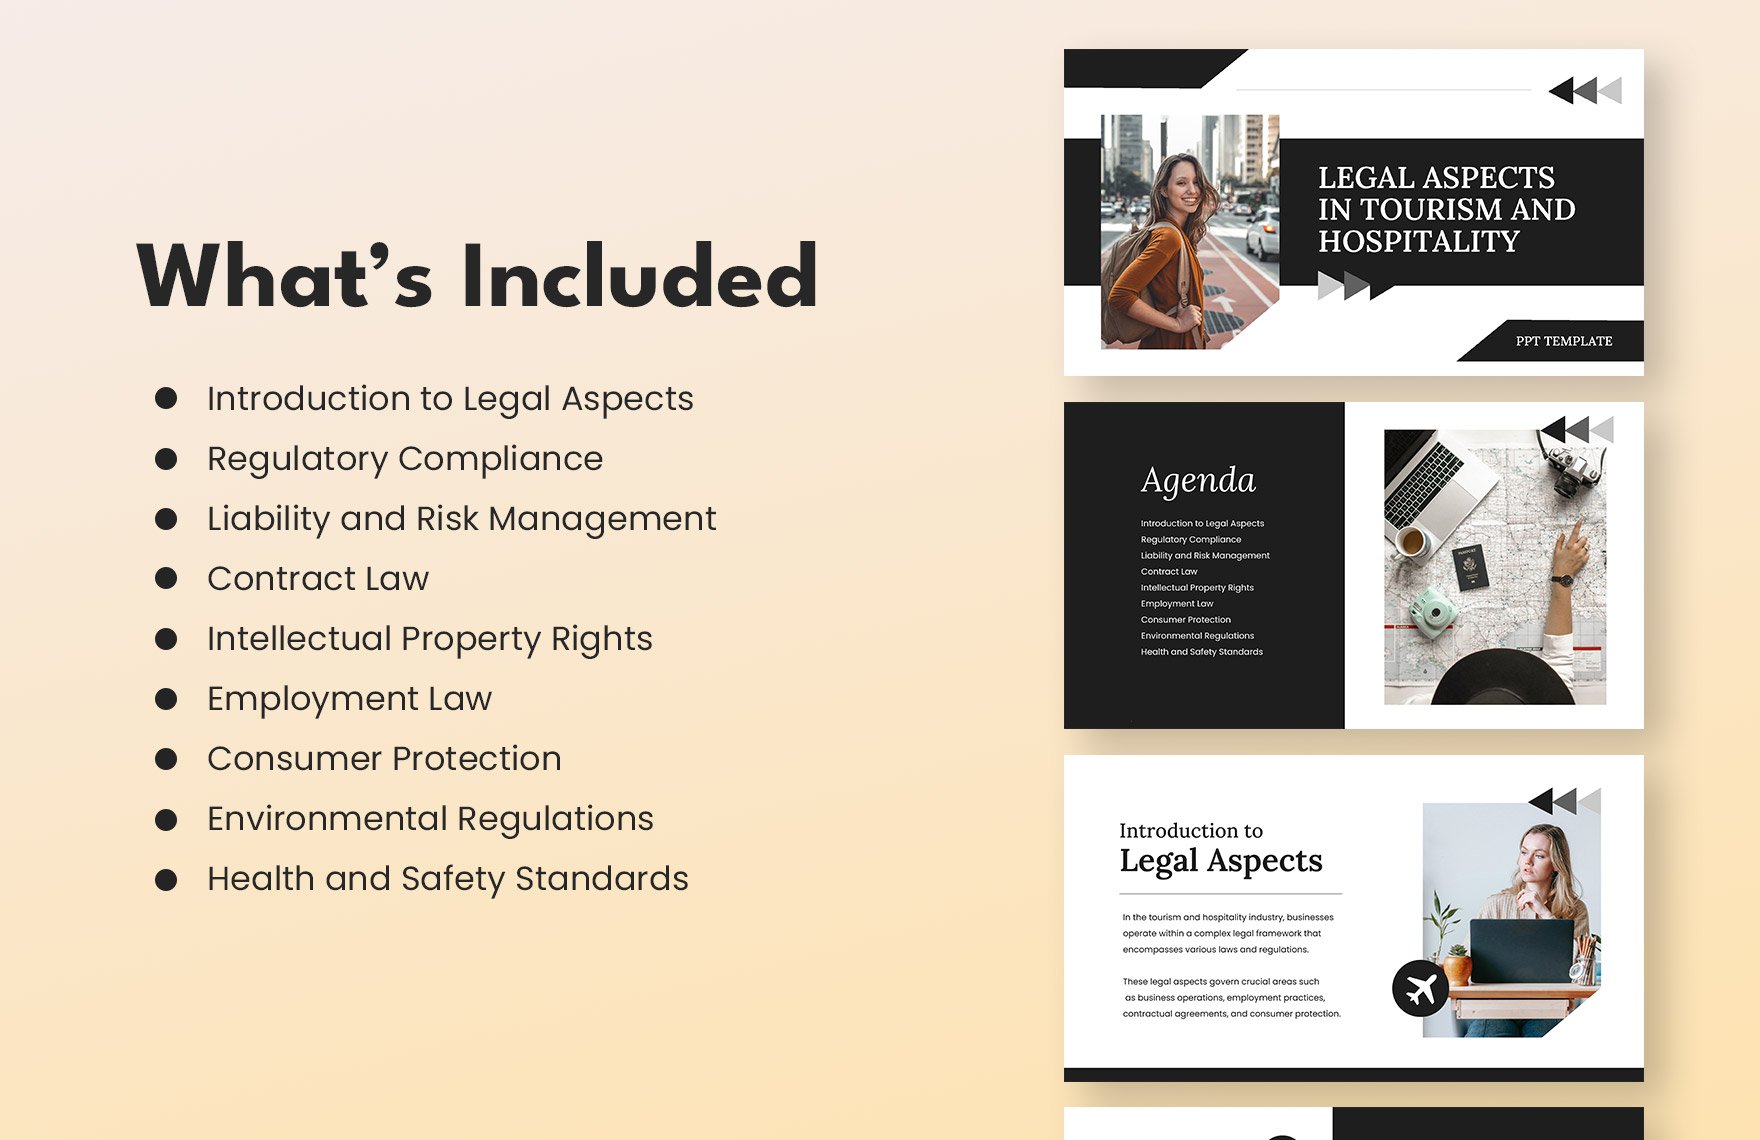 Legal Aspects in Tourism and Hospitality PPT Template